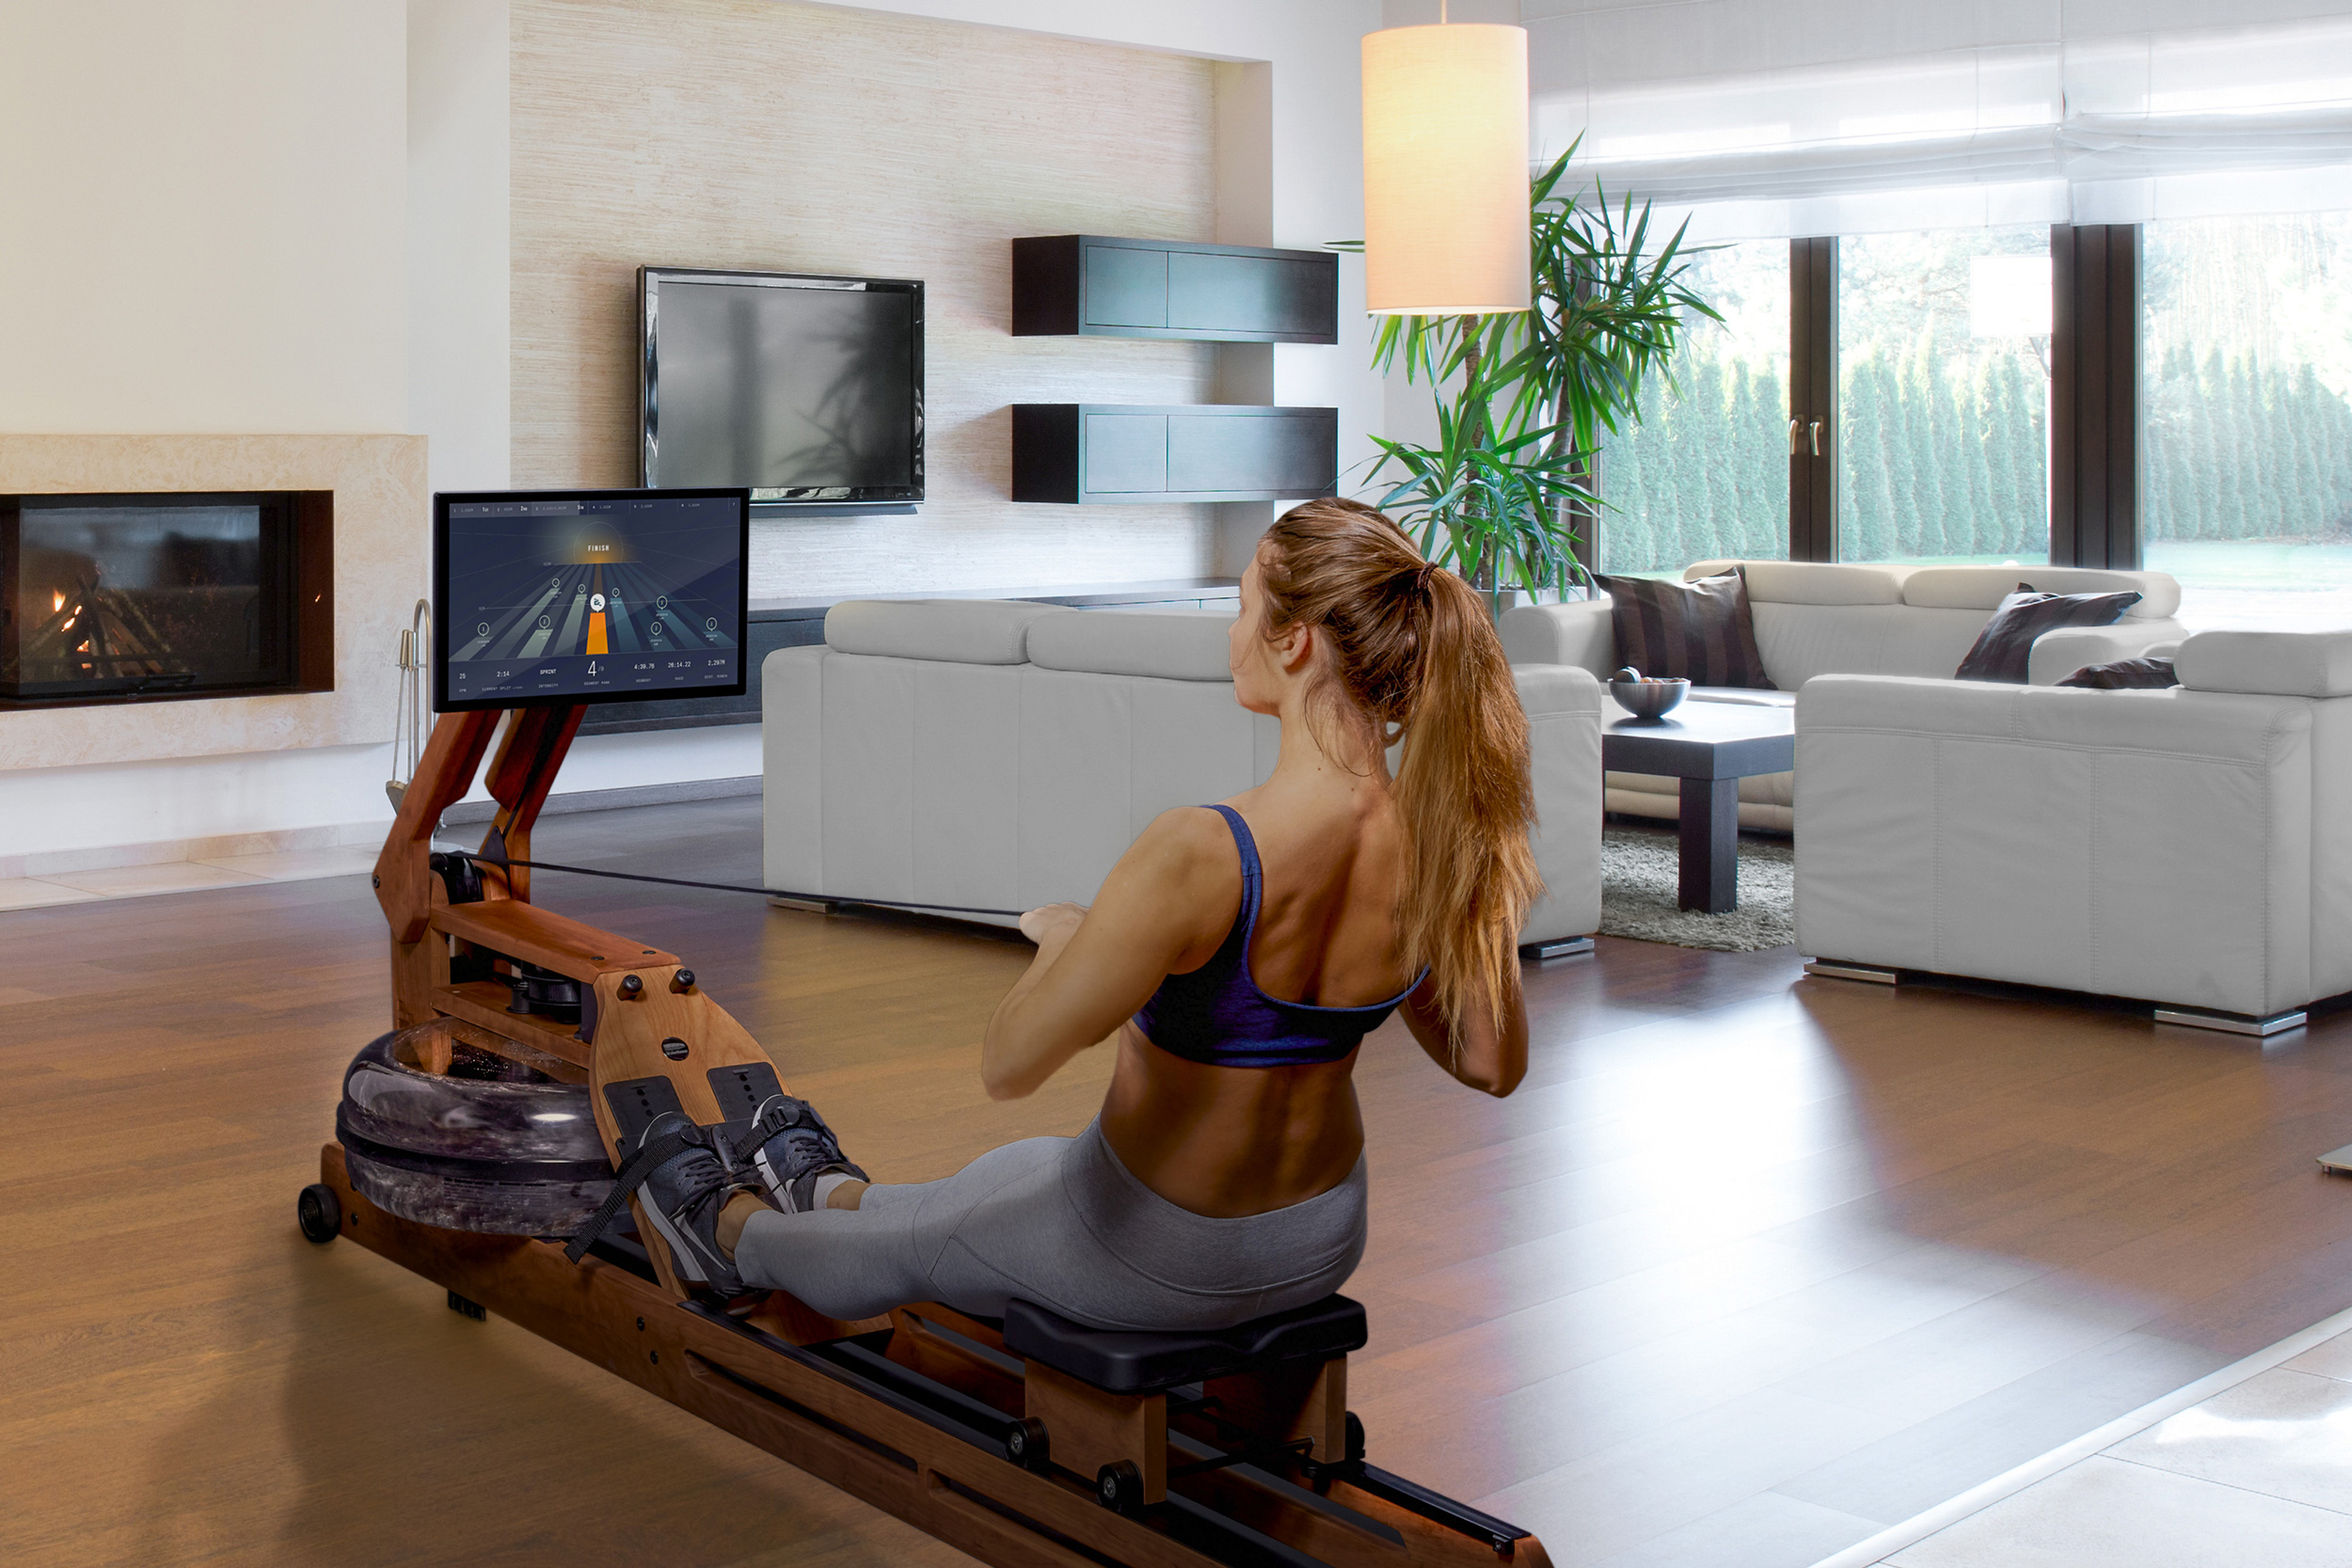 Eratta game-based connected rower